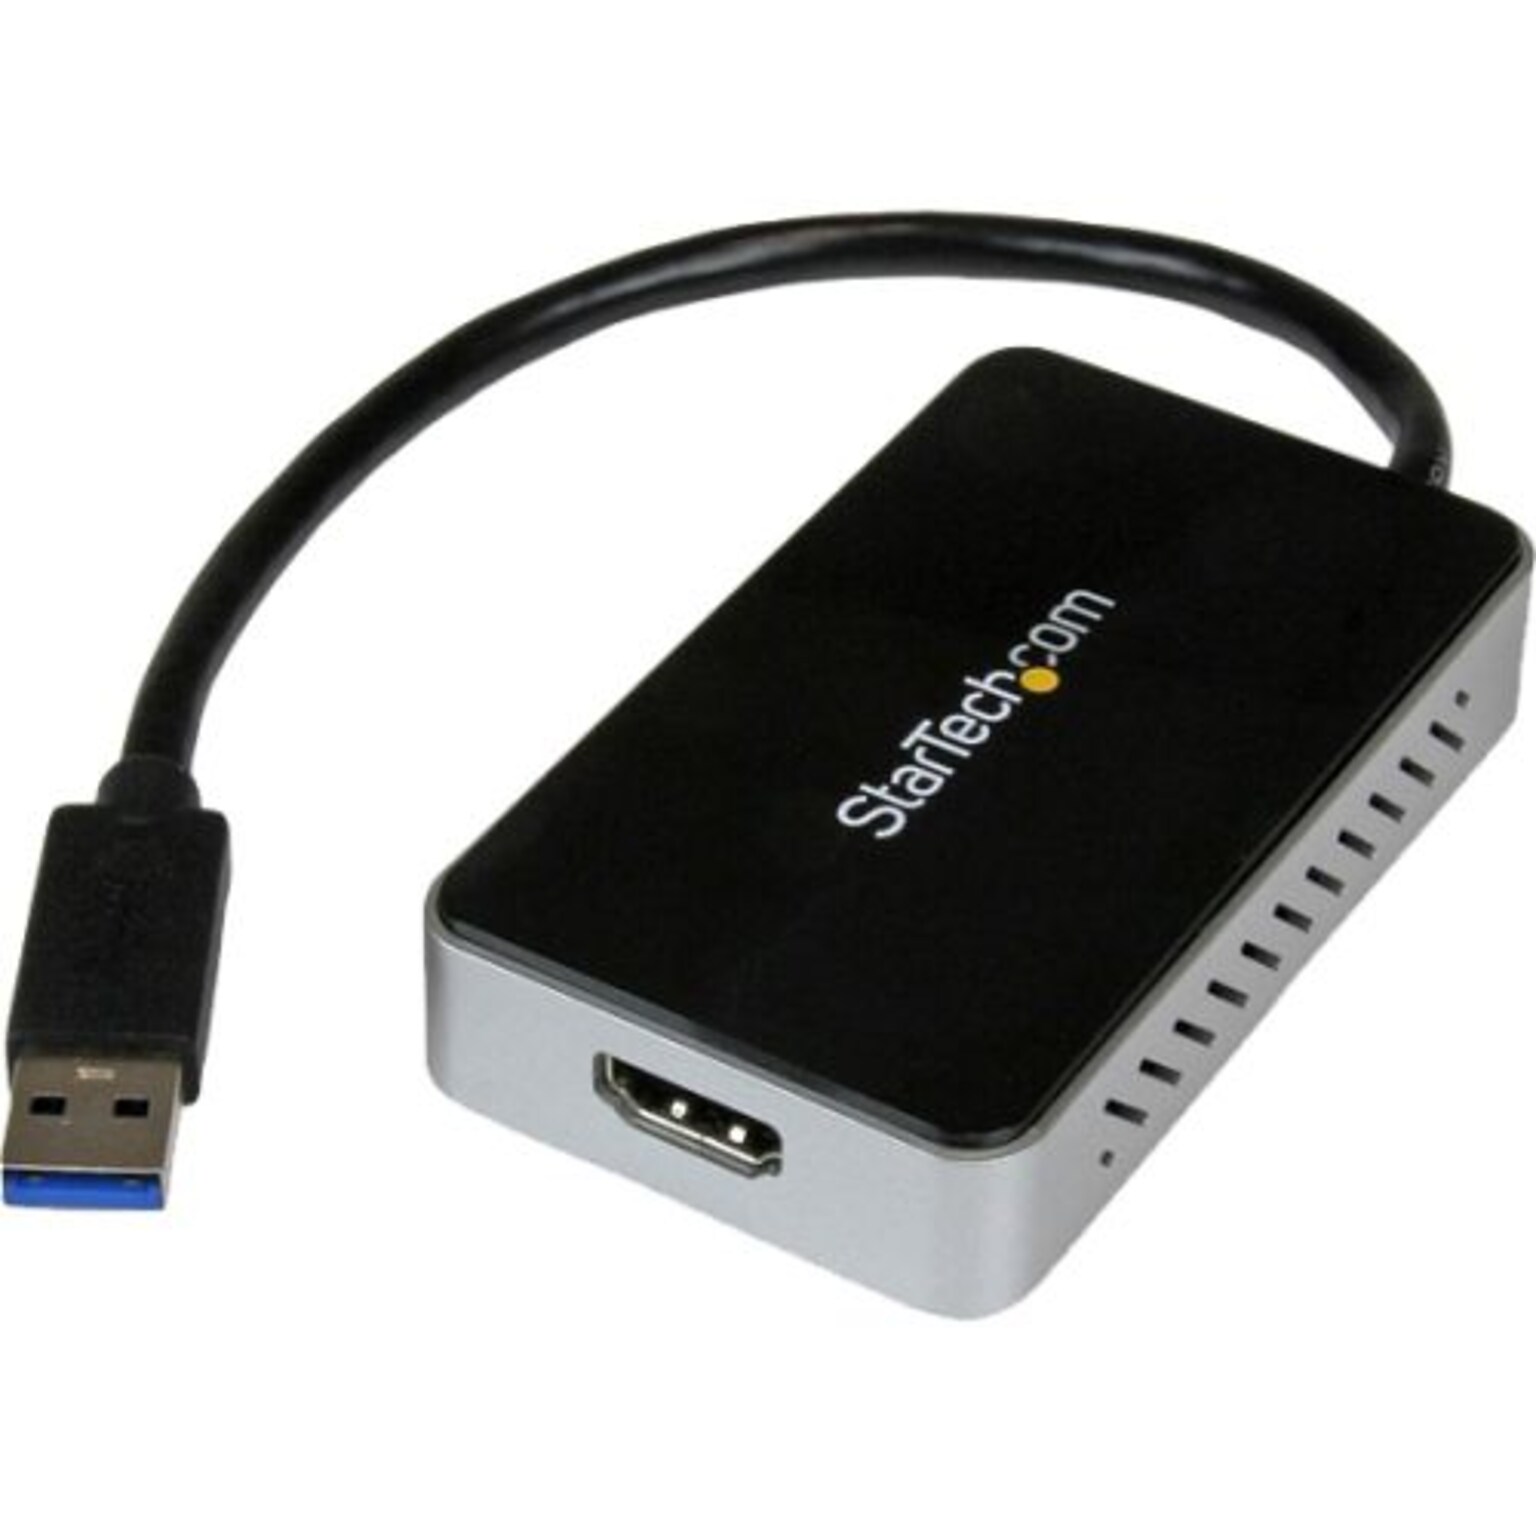 Startech® 0.52 USB 3.0 to HDMI External Video Card Multi Monitor Adapter; 1 Port